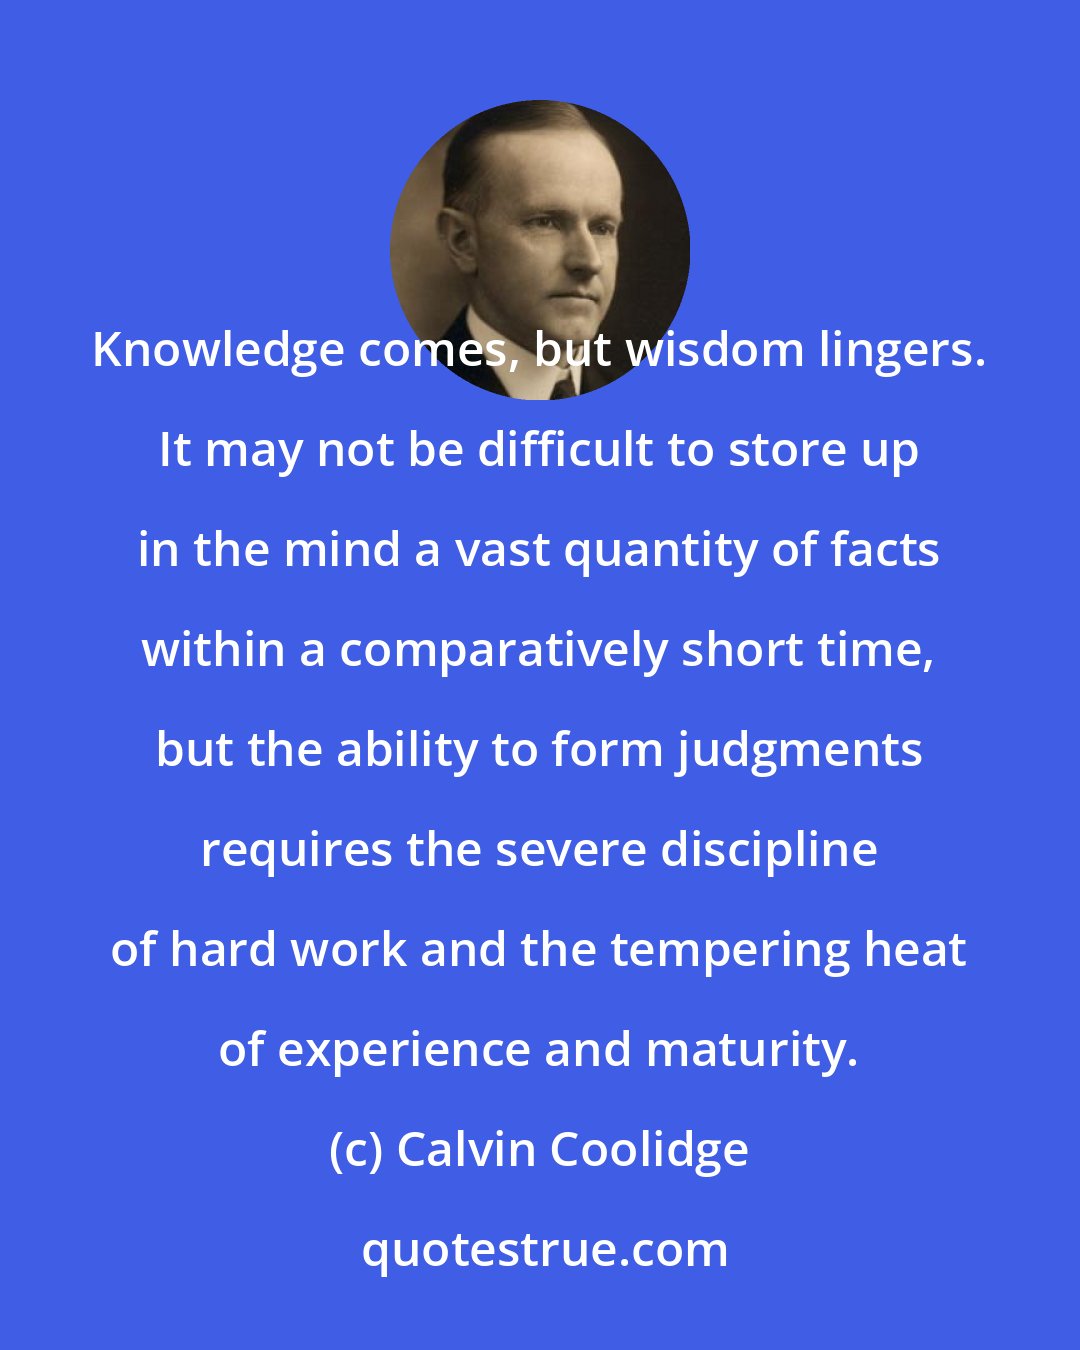 Calvin Coolidge: Knowledge comes, but wisdom lingers. It may not be difficult to store up in the mind a vast quantity of facts within a comparatively short time, but the ability to form judgments requires the severe discipline of hard work and the tempering heat of experience and maturity.